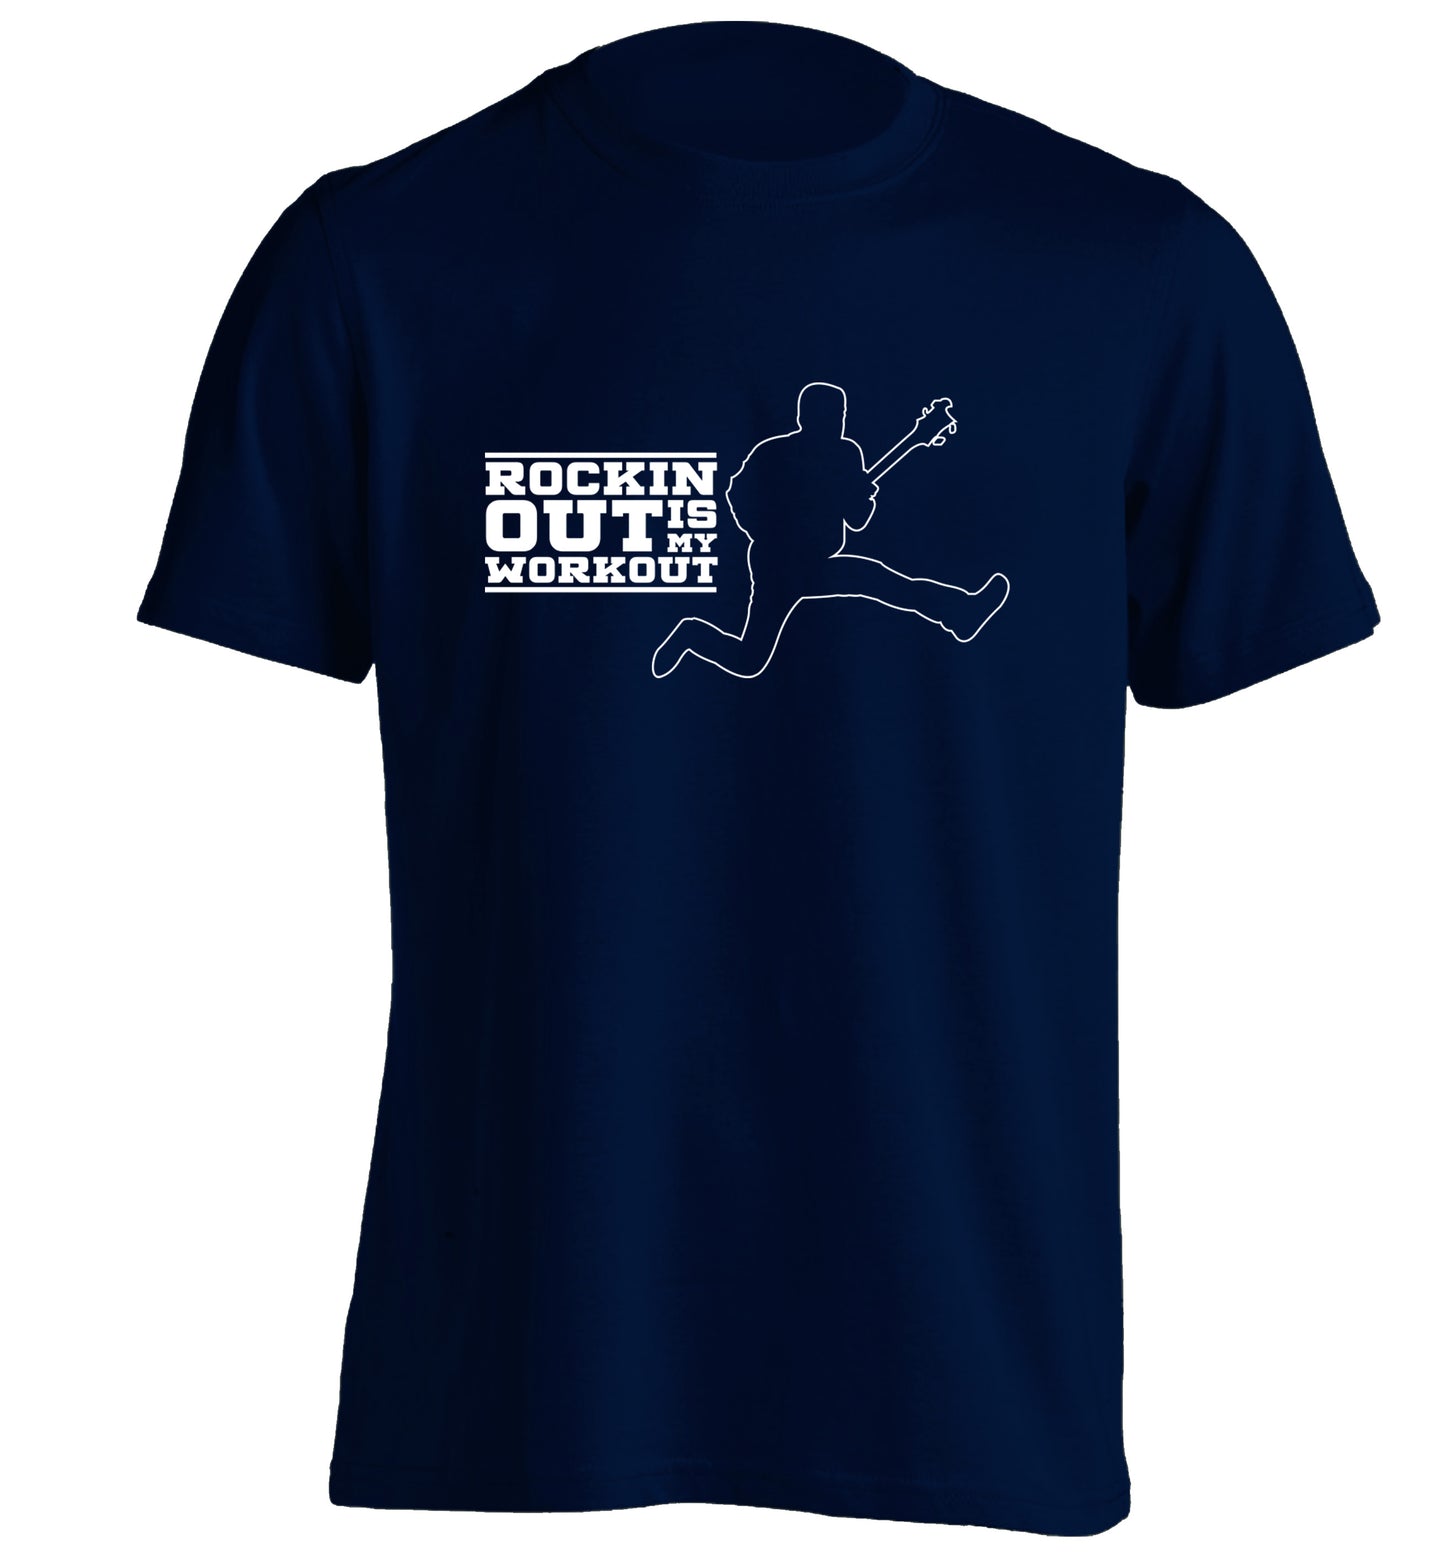 Rockin out is my workout adults unisex navy Tshirt 2XL